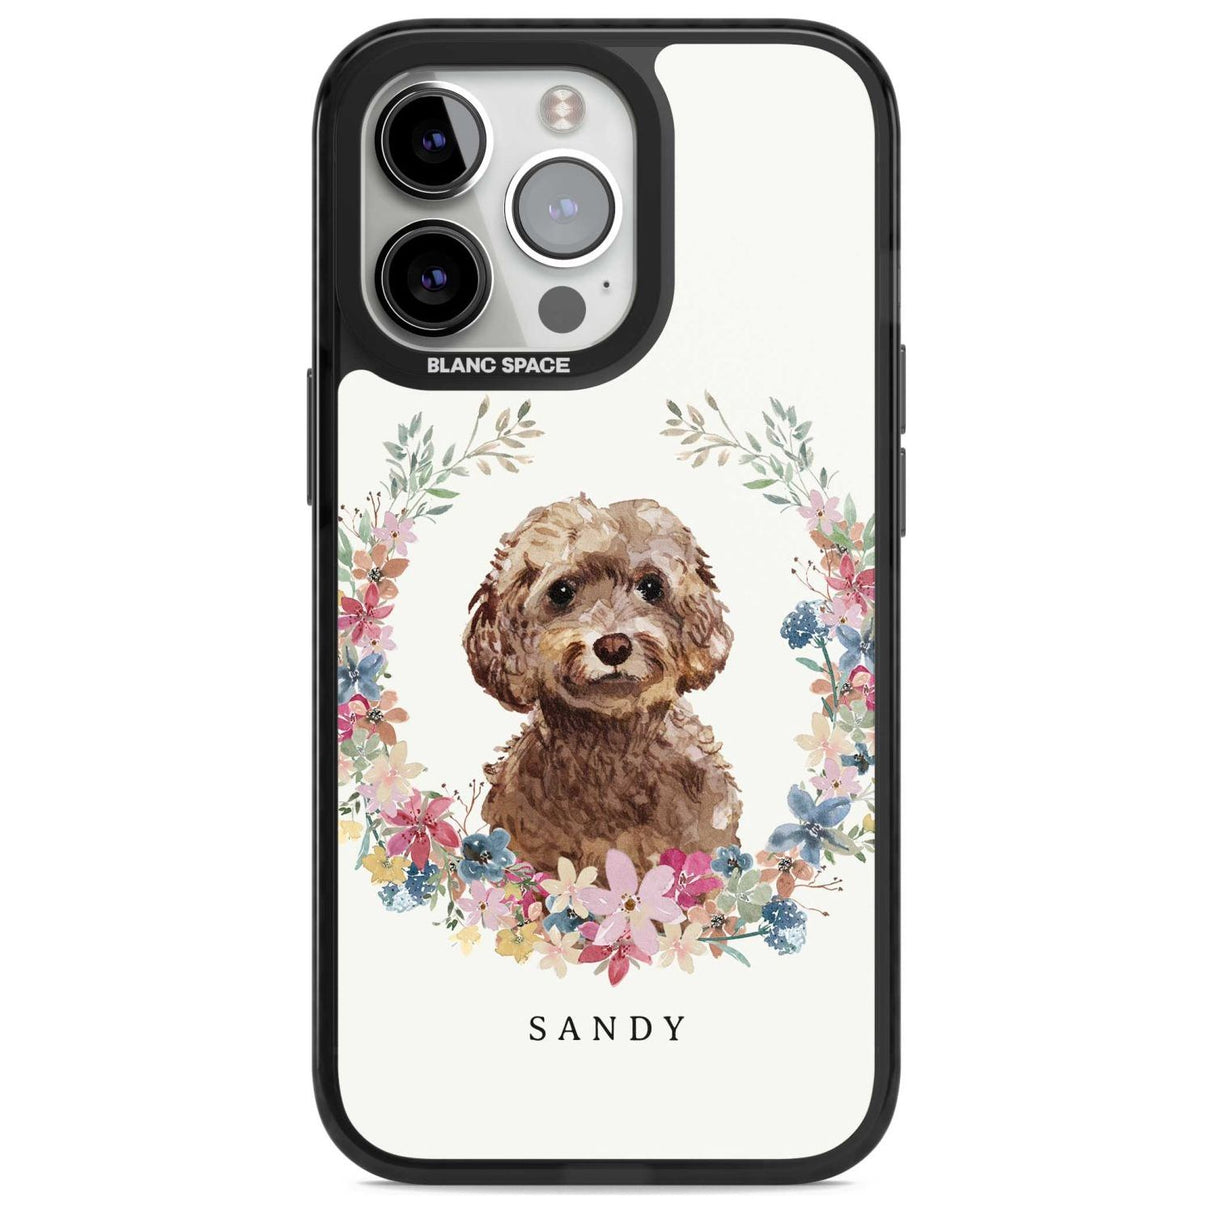 Personalised Brown Cockapoo - Watercolour Dog Portrait Custom Phone Case iPhone 15 Pro Max / Magsafe Black Impact Case,iPhone 15 Pro / Magsafe Black Impact Case,iPhone 14 Pro Max / Magsafe Black Impact Case,iPhone 14 Pro / Magsafe Black Impact Case,iPhone 13 Pro / Magsafe Black Impact Case Blanc Space